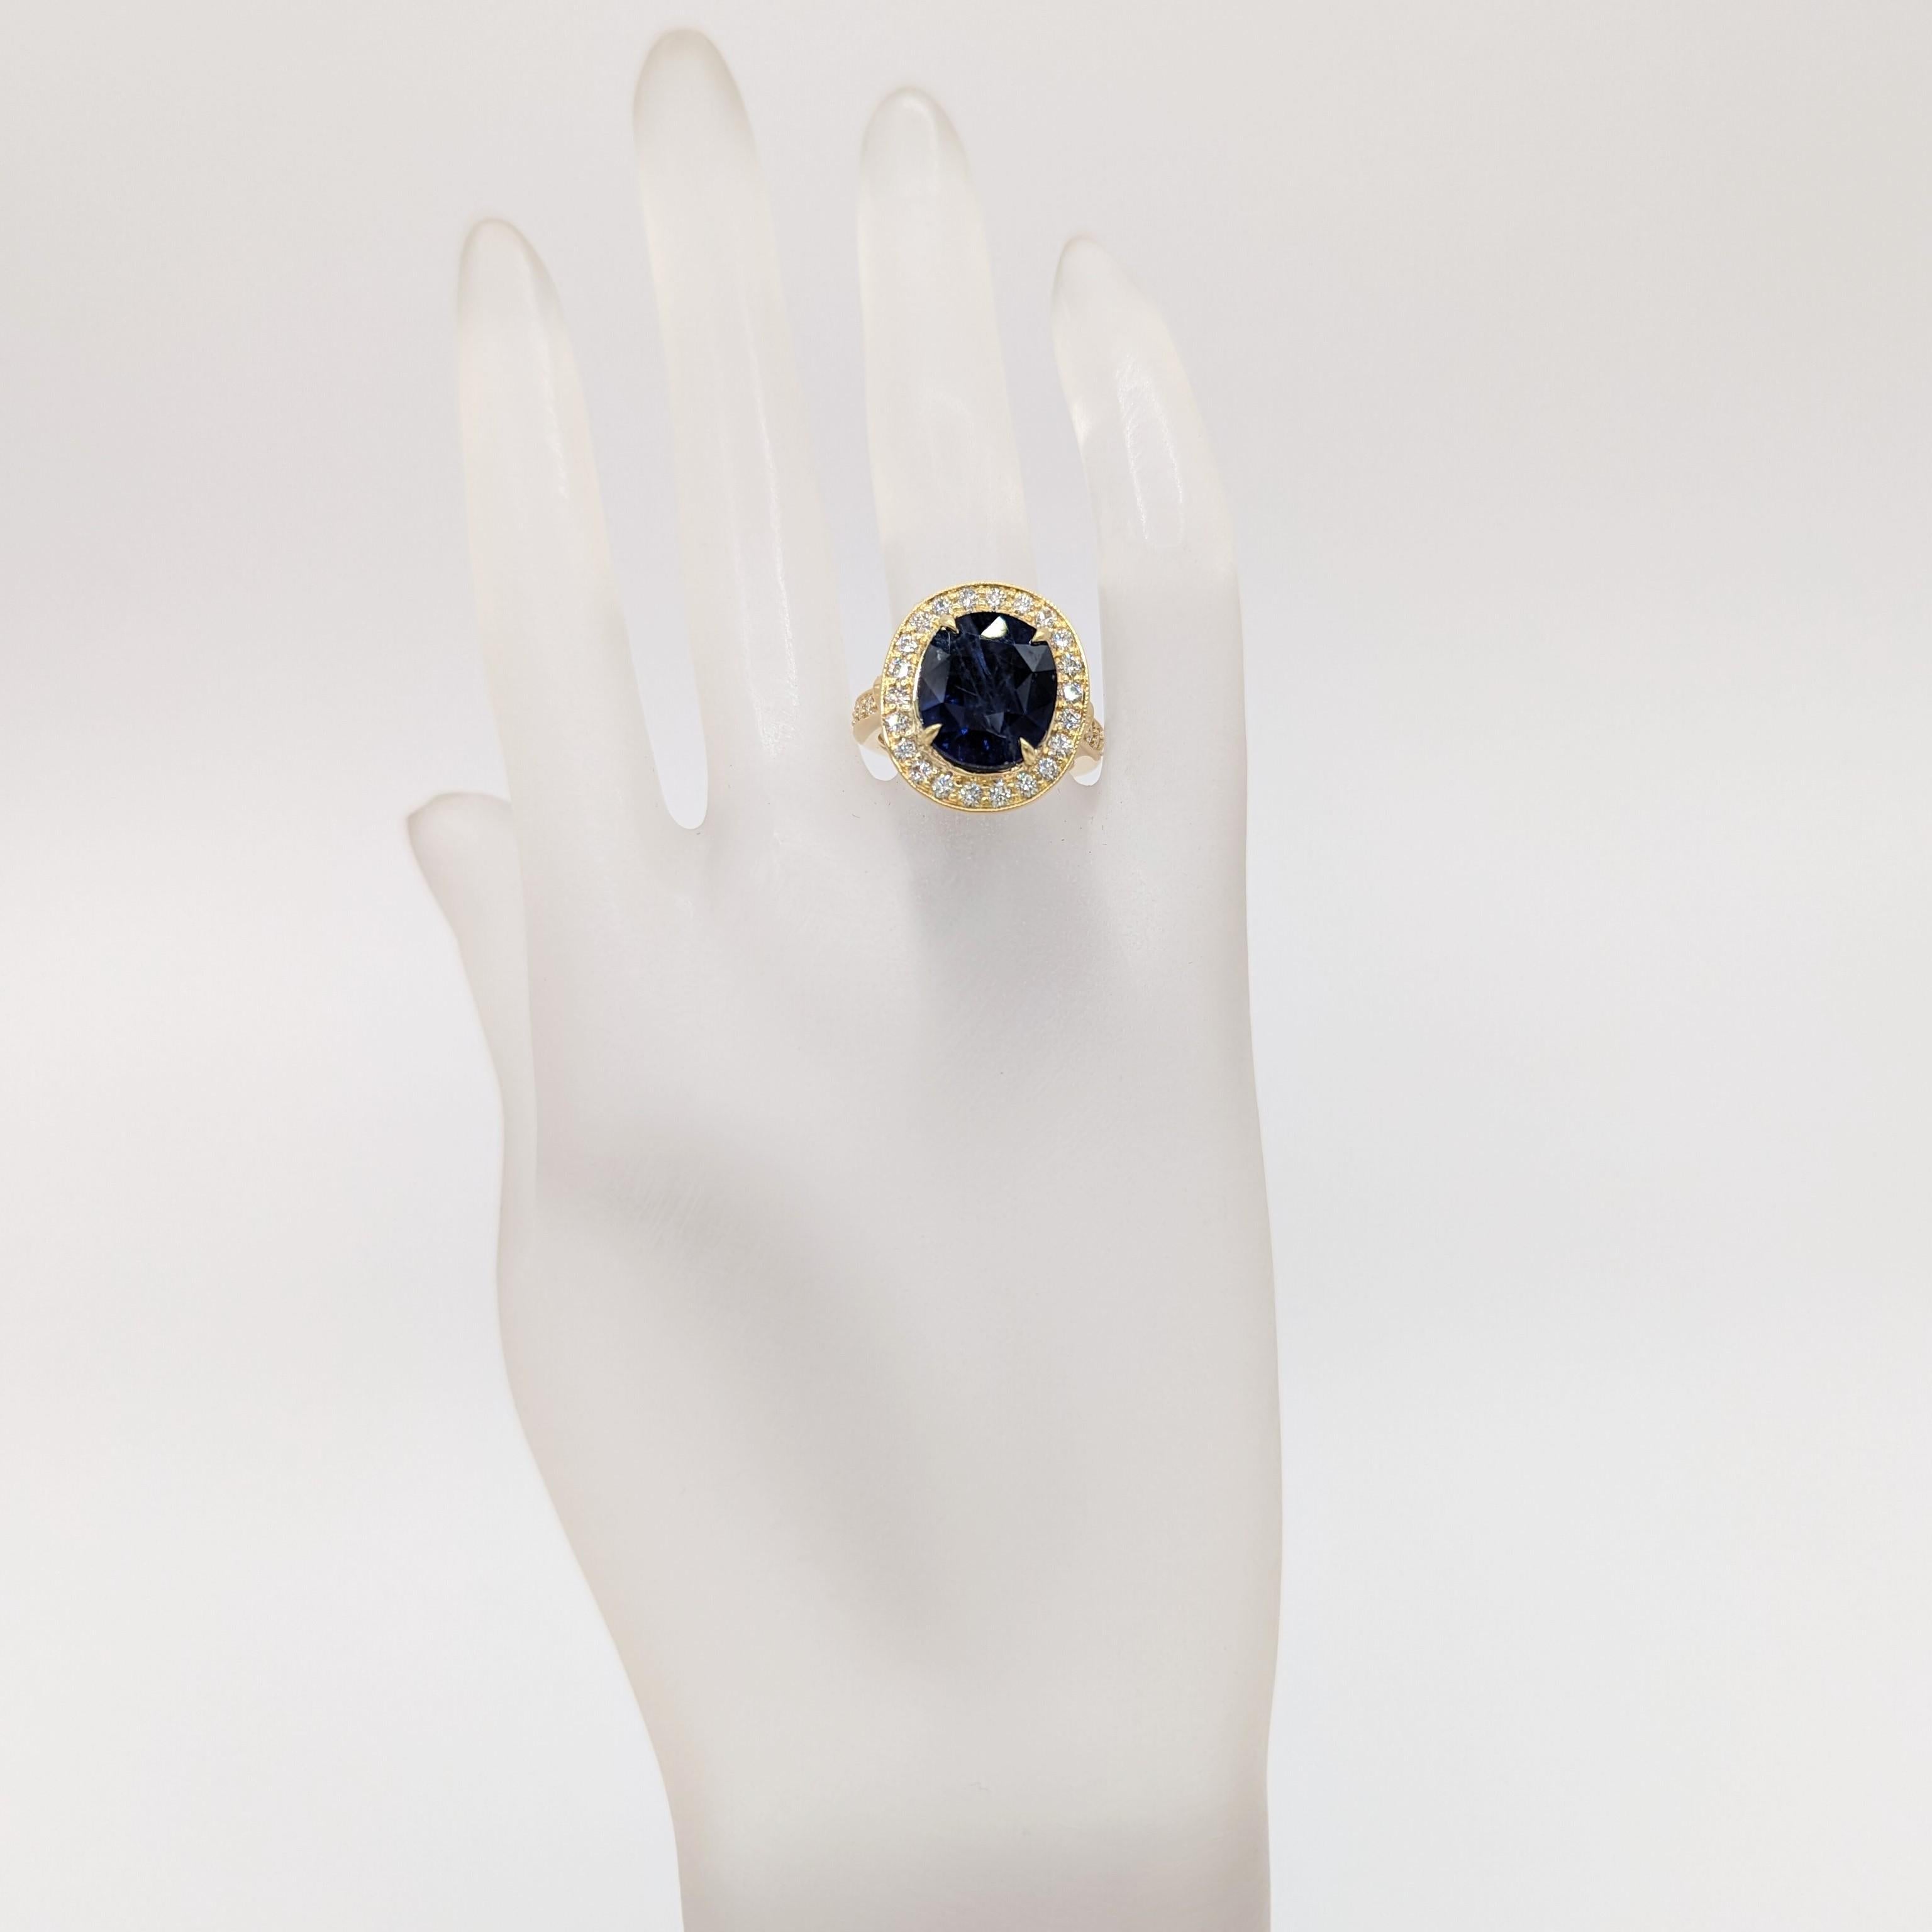 GIA 9.45 ct. Sri Lanka blue sapphire oval with good quality white diamond rounds.  Handmade in 18k yellow gold.  Ring size 7.  GIA certificate included.